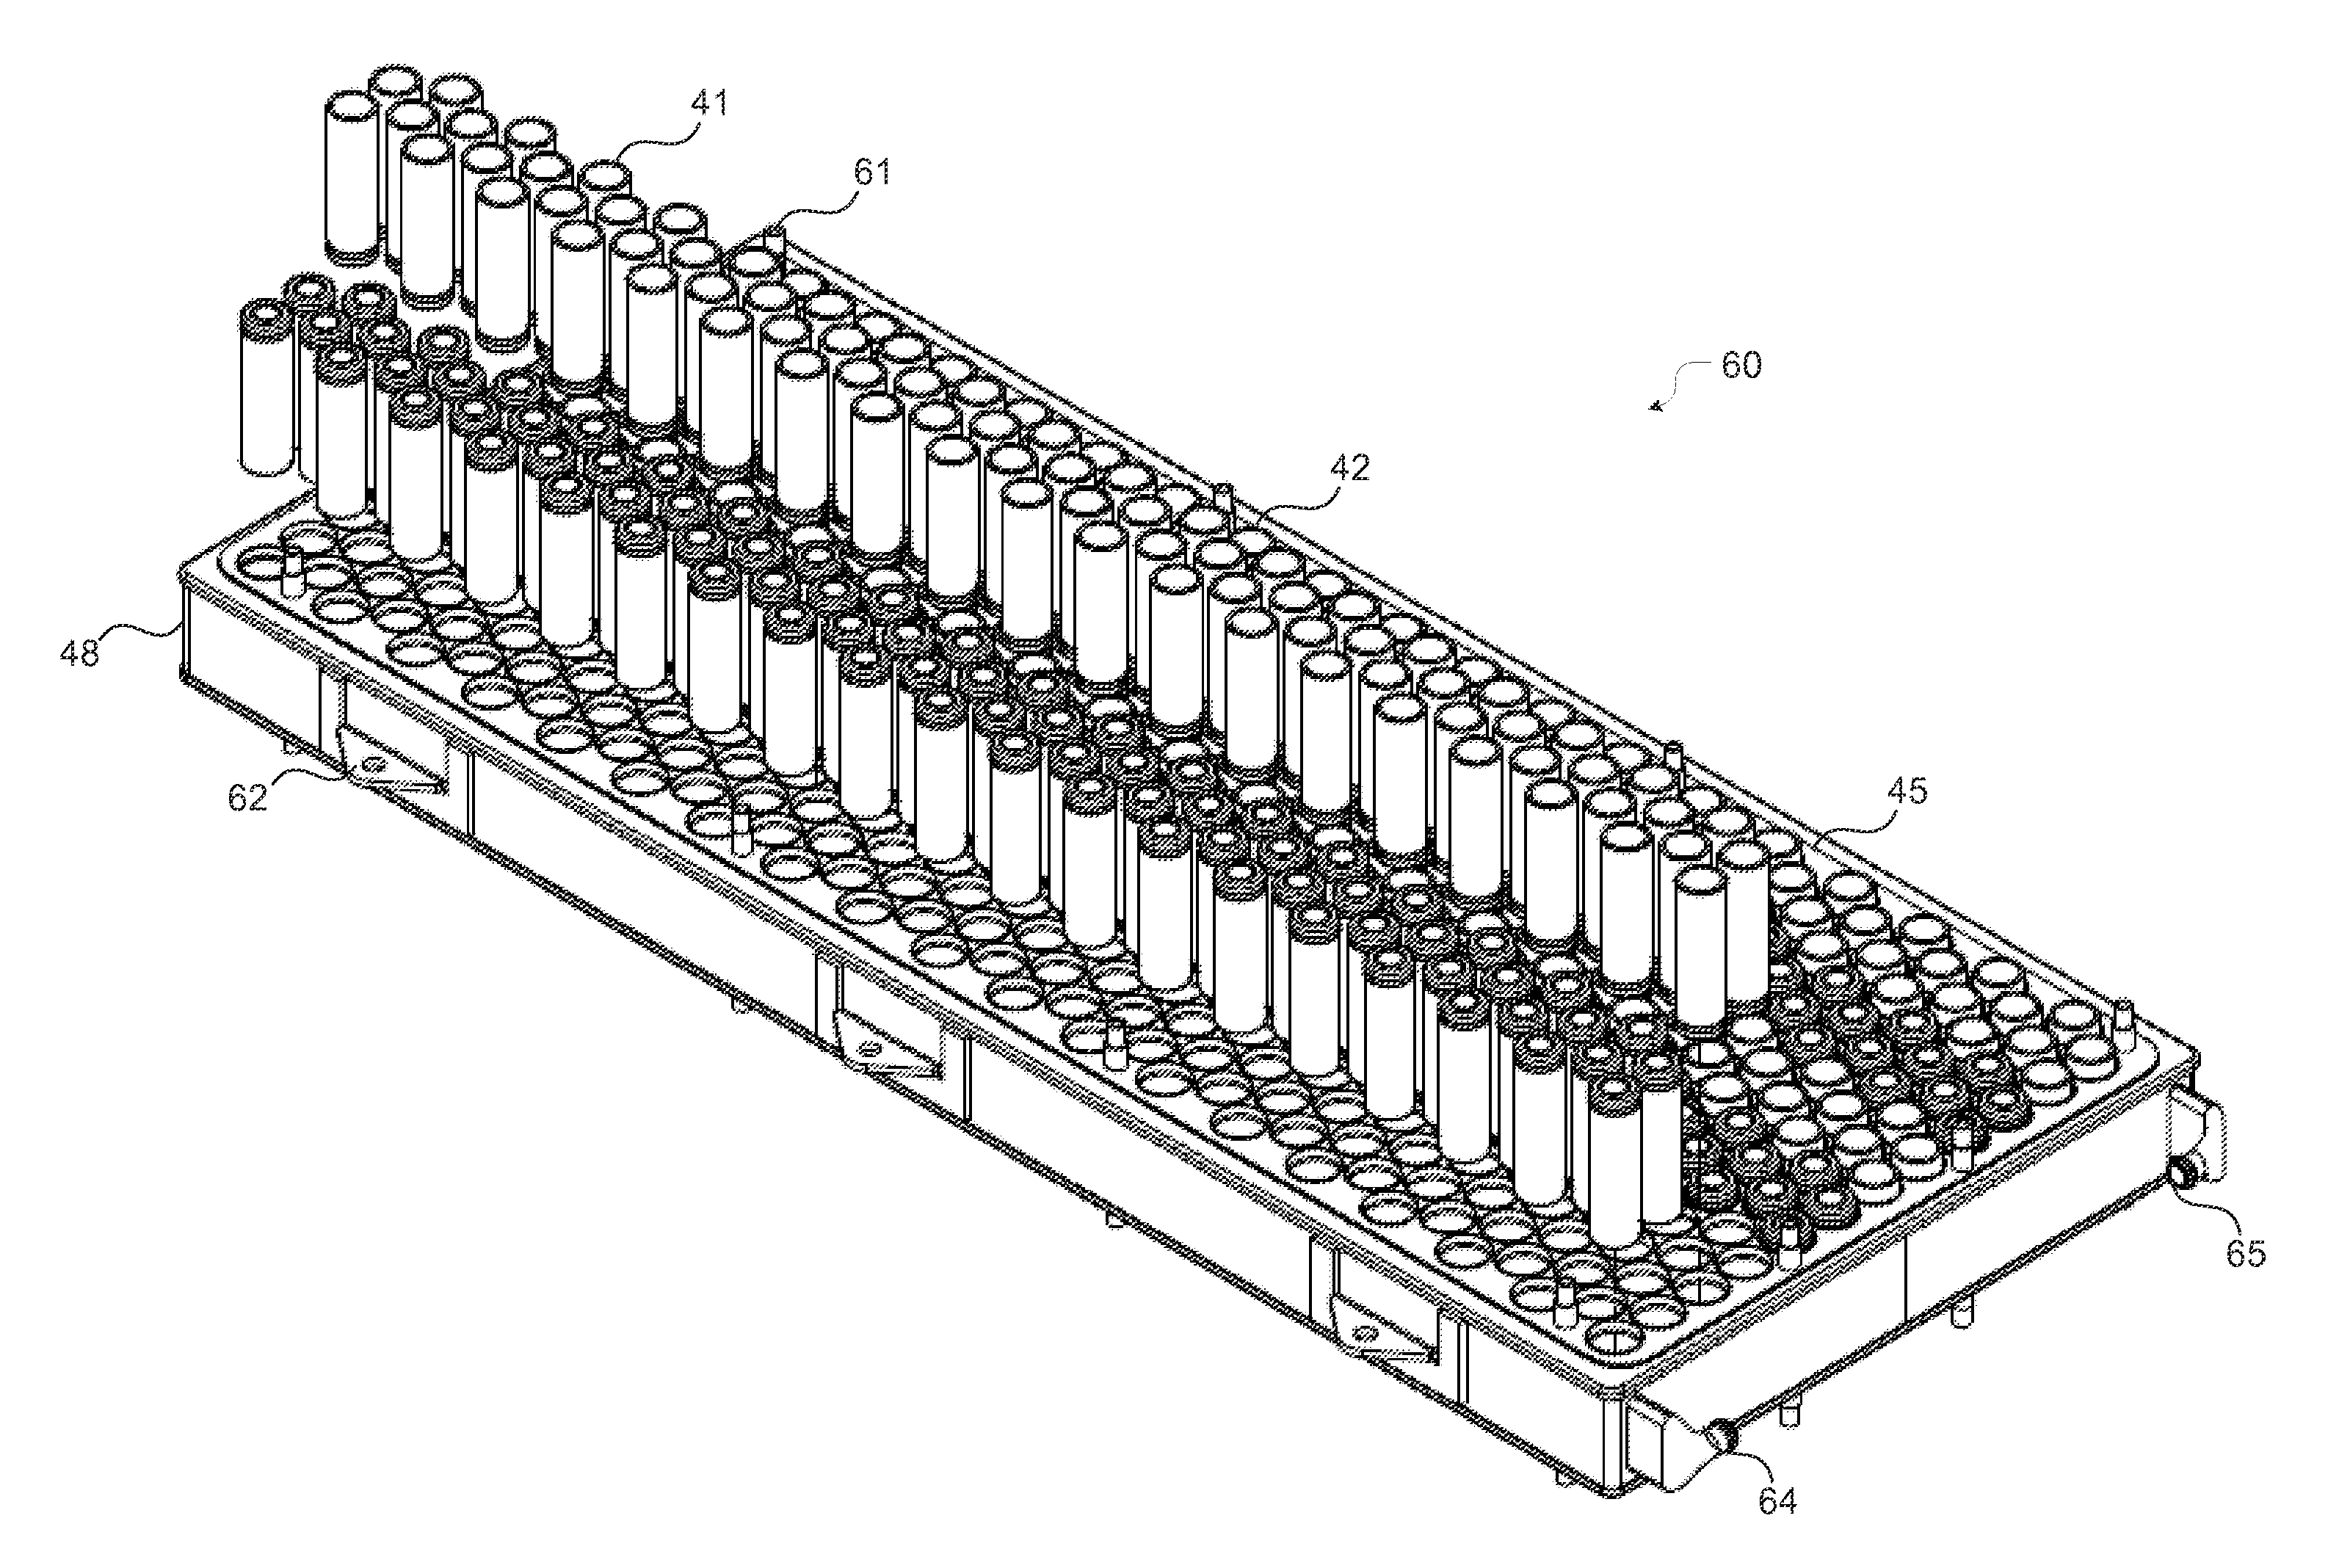 Vehicle Battery Module with Cooling and Safety Features